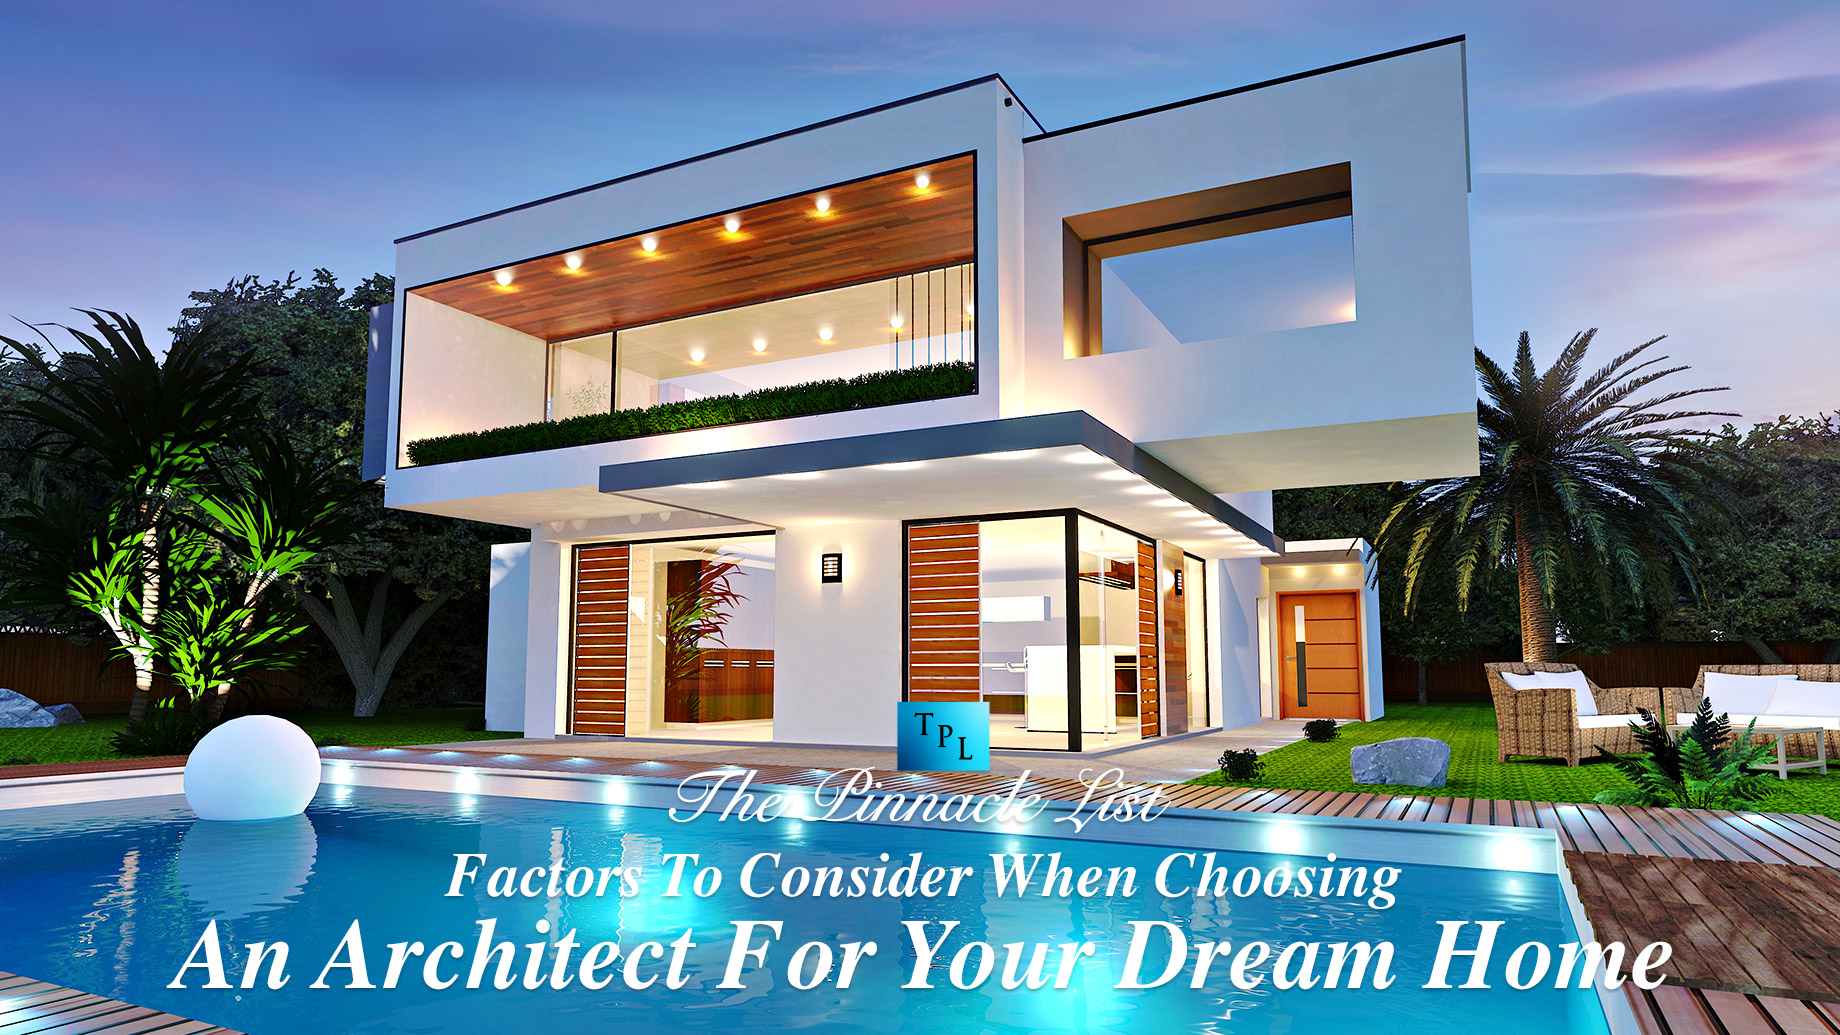 Factors To Consider When Choosing An Architect For Your Dream Home